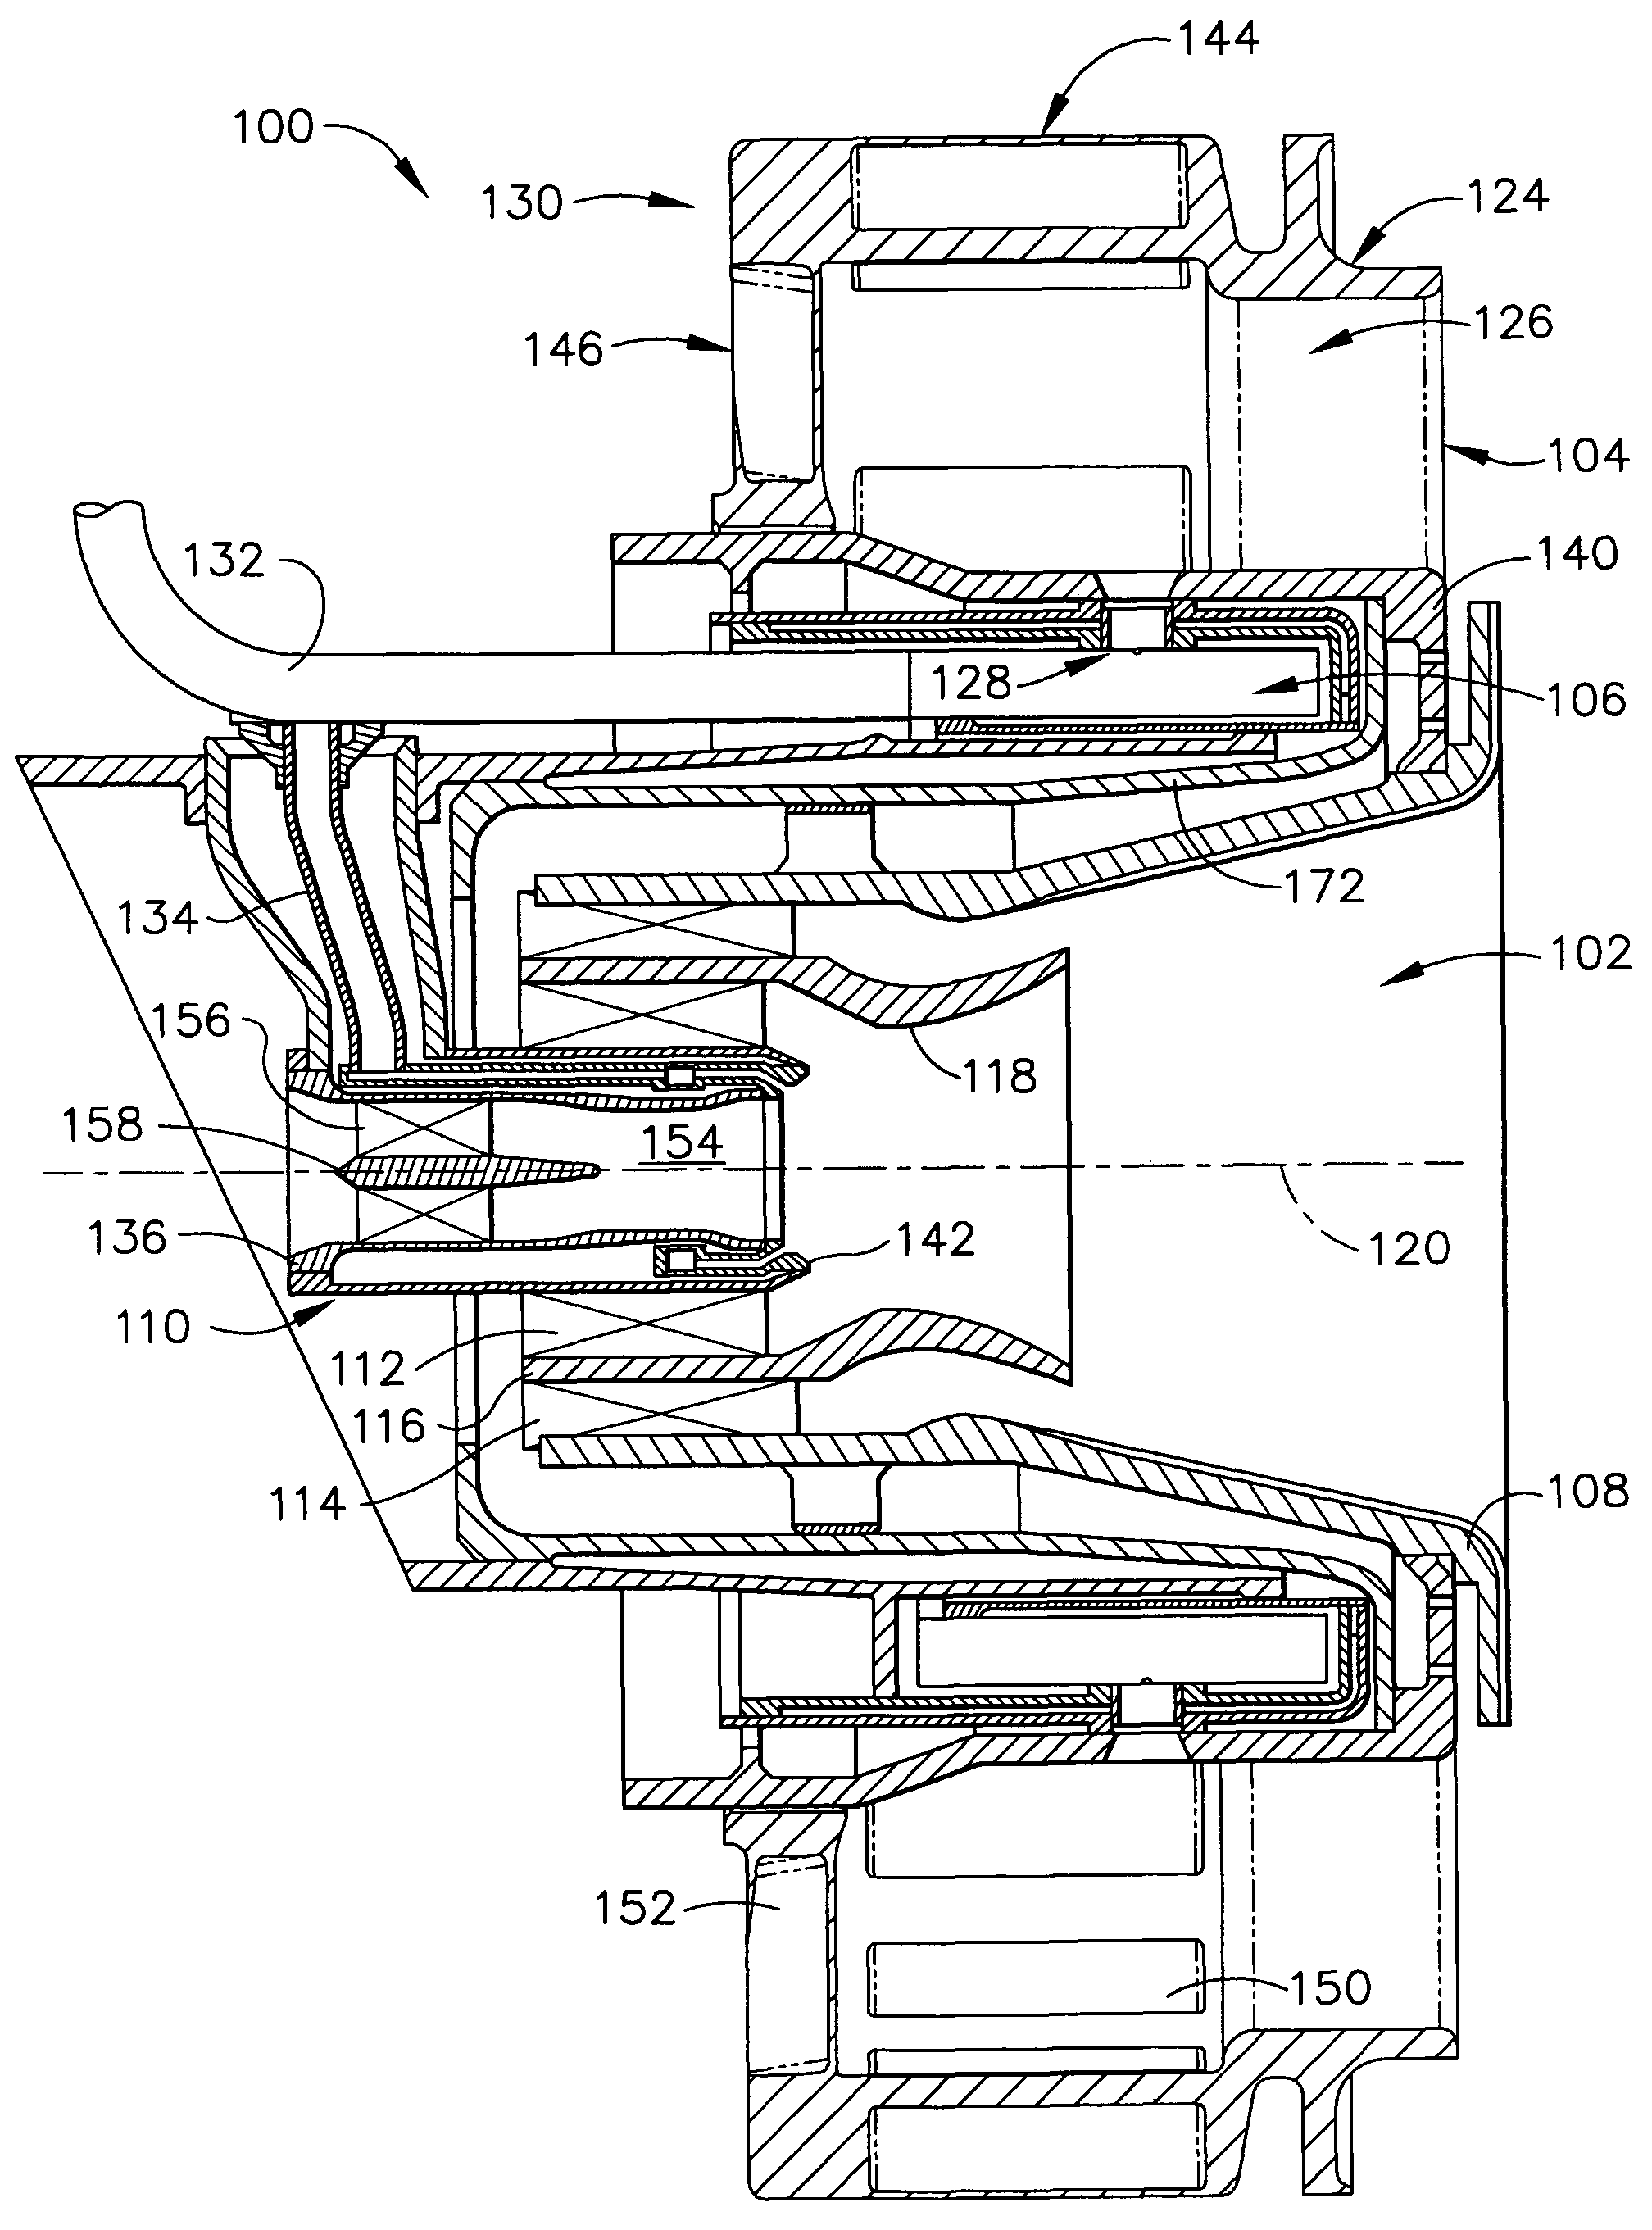 Pilot fuel injector for mixer assembly of a high pressure gas turbine engine